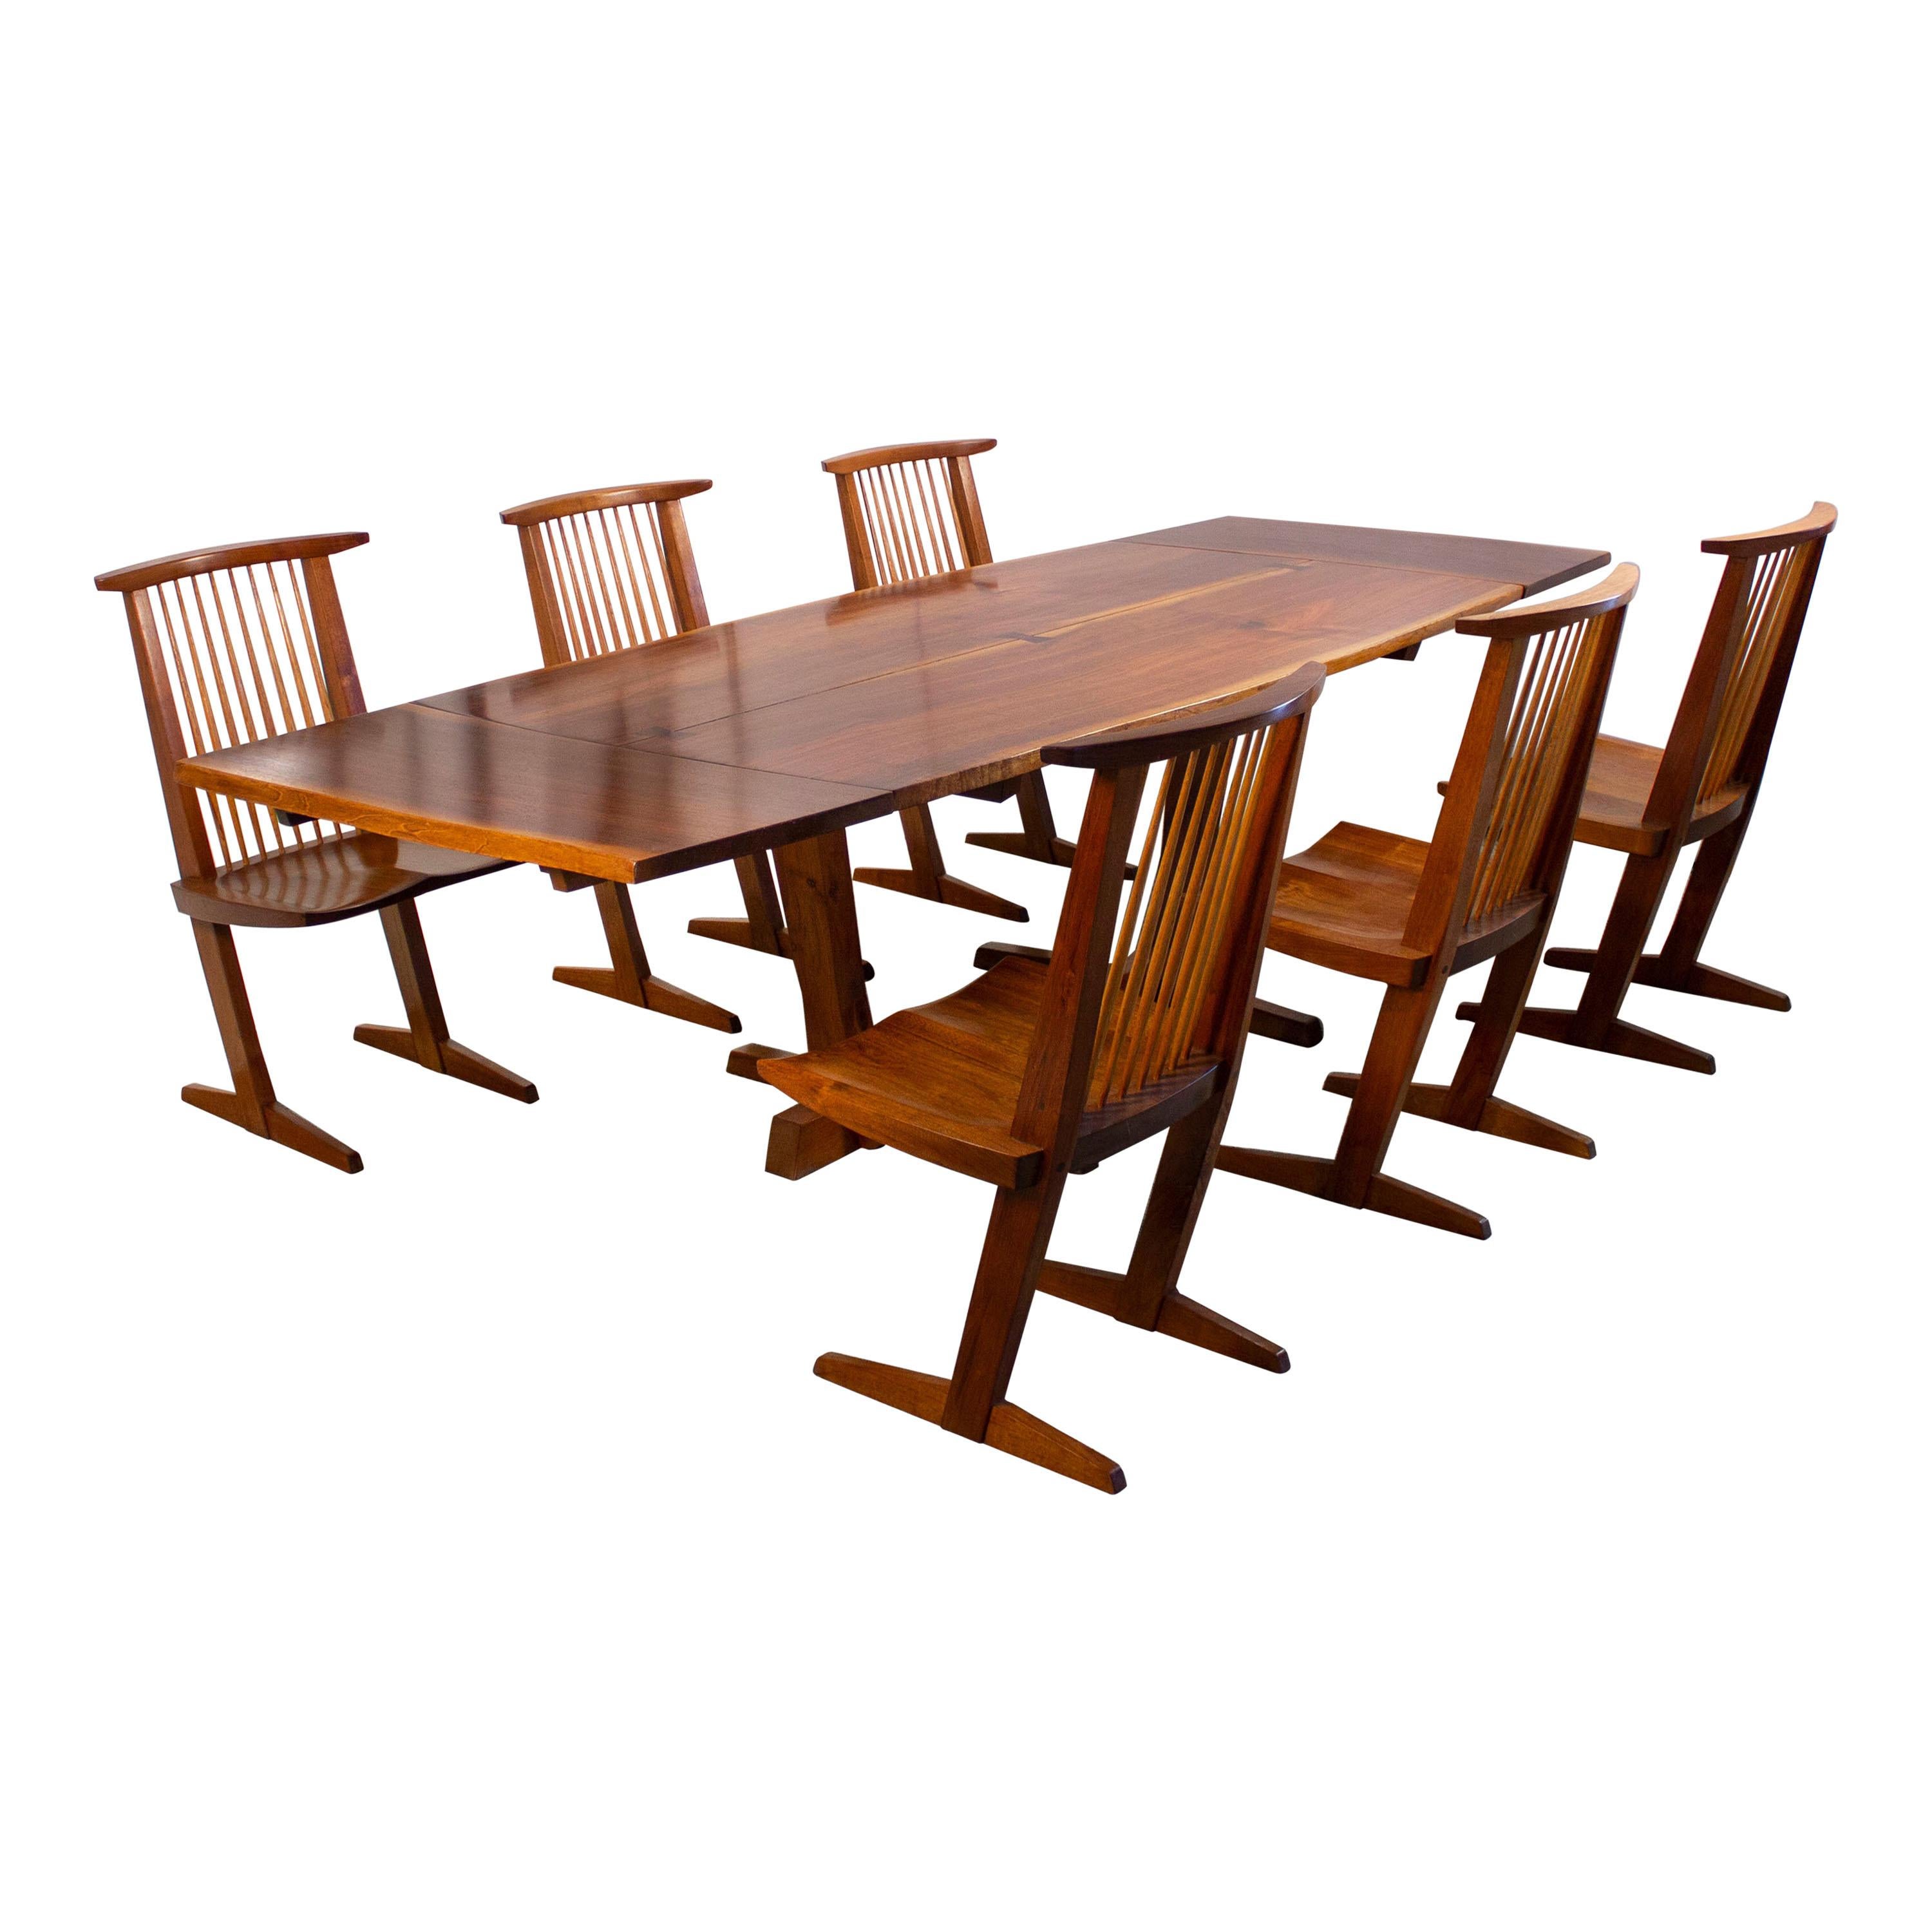 George Nakashima Conoid Dining Set in Sap Walnut with Free Form Edges & 6 Chairs